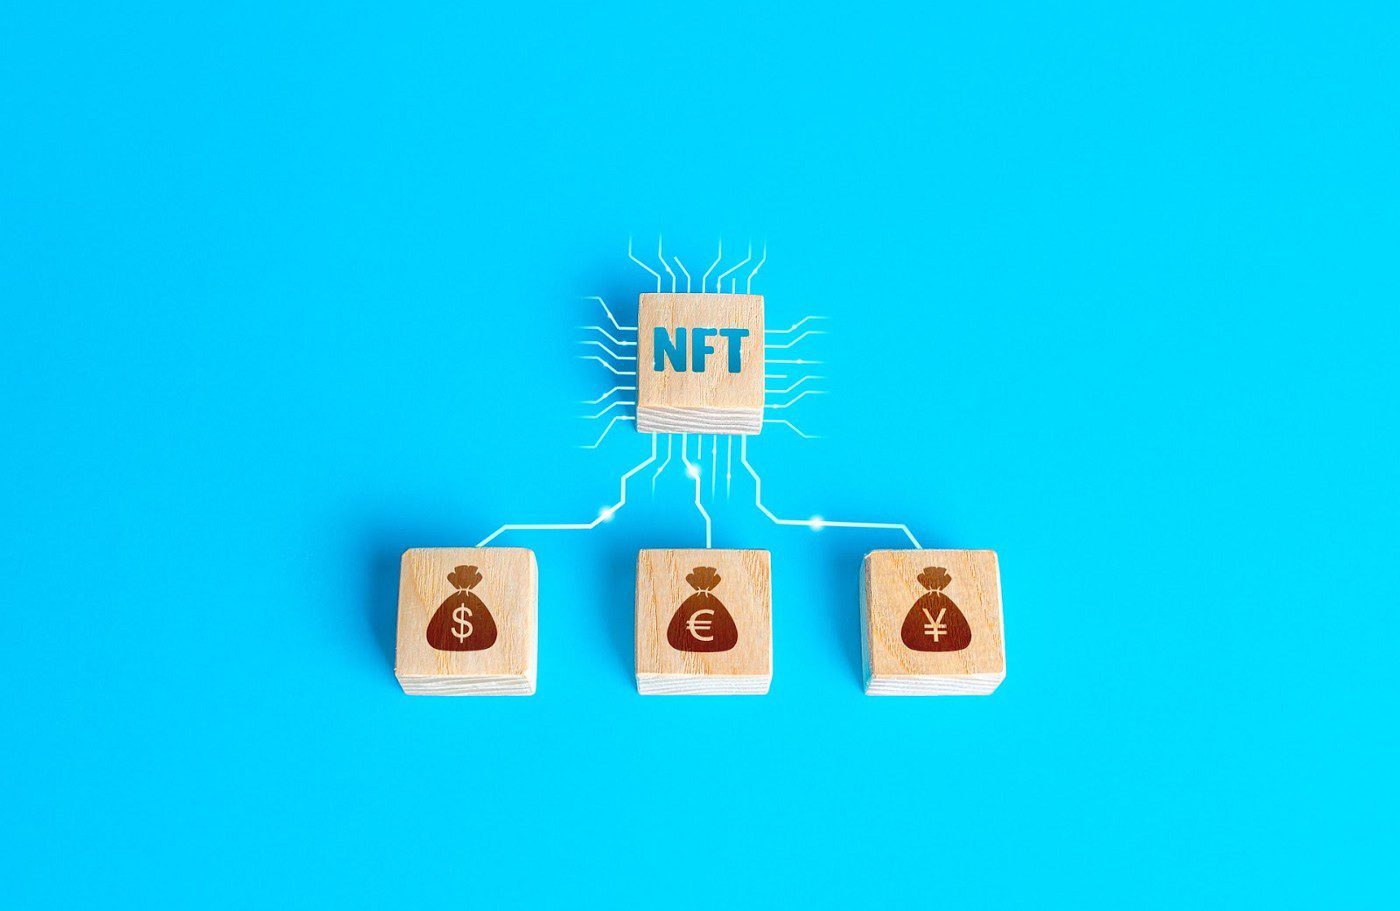 Here are 3 NFT collections you can mint this September to make money